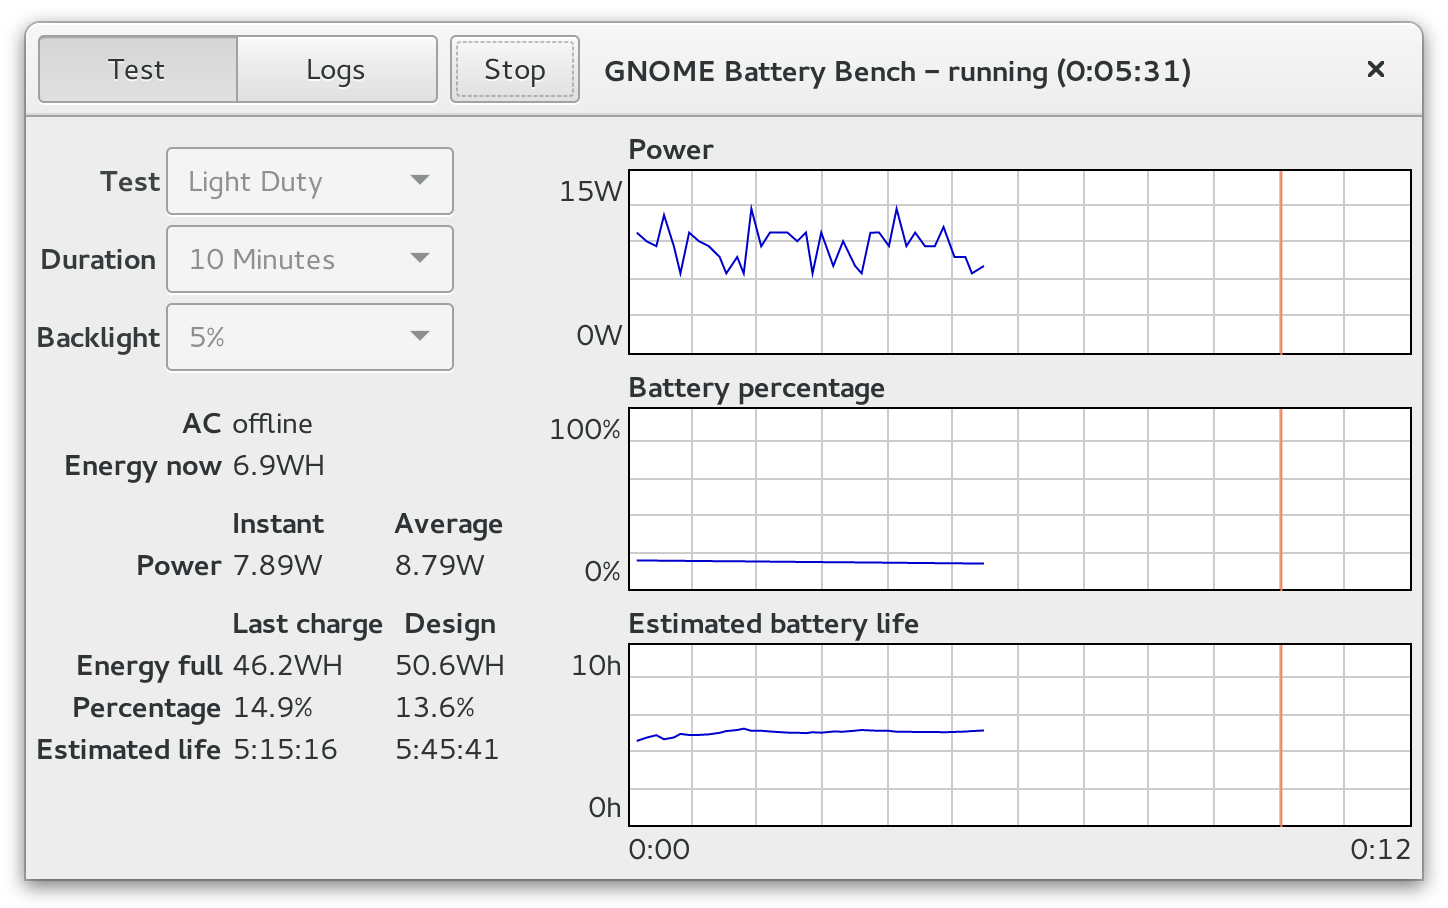 GNOME Battery bench